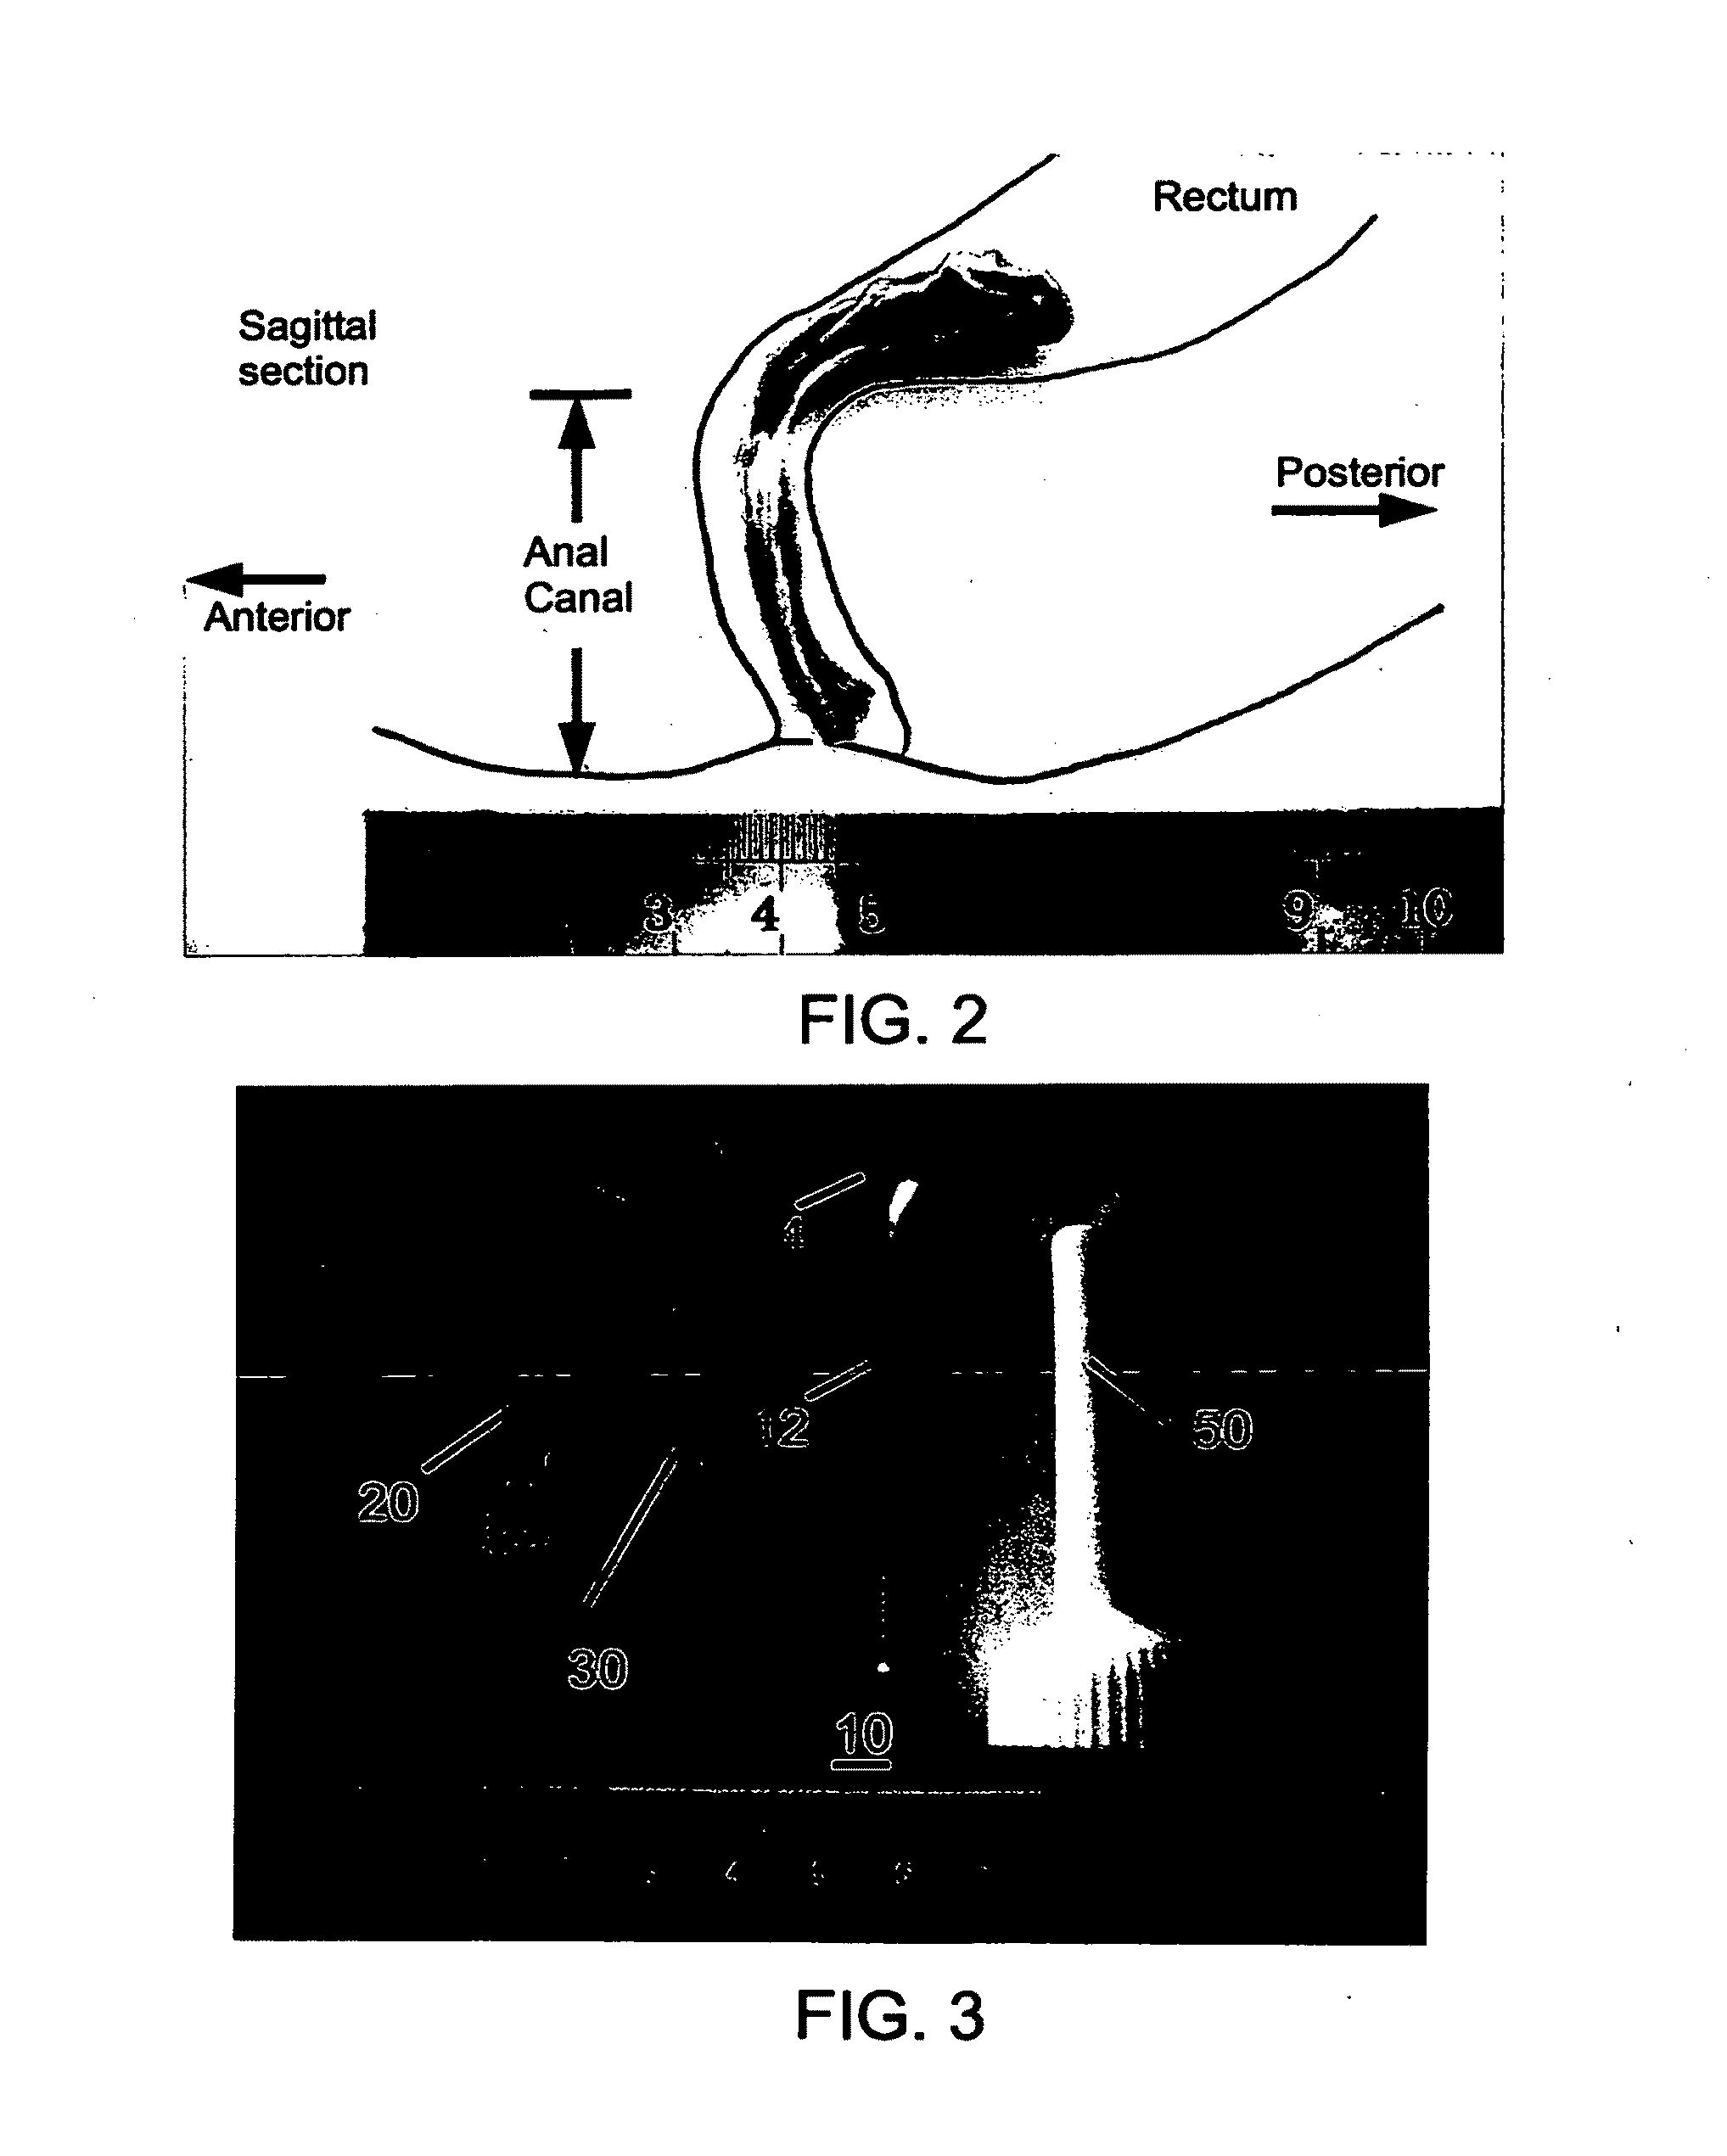 Fecal incontinence device, system and method